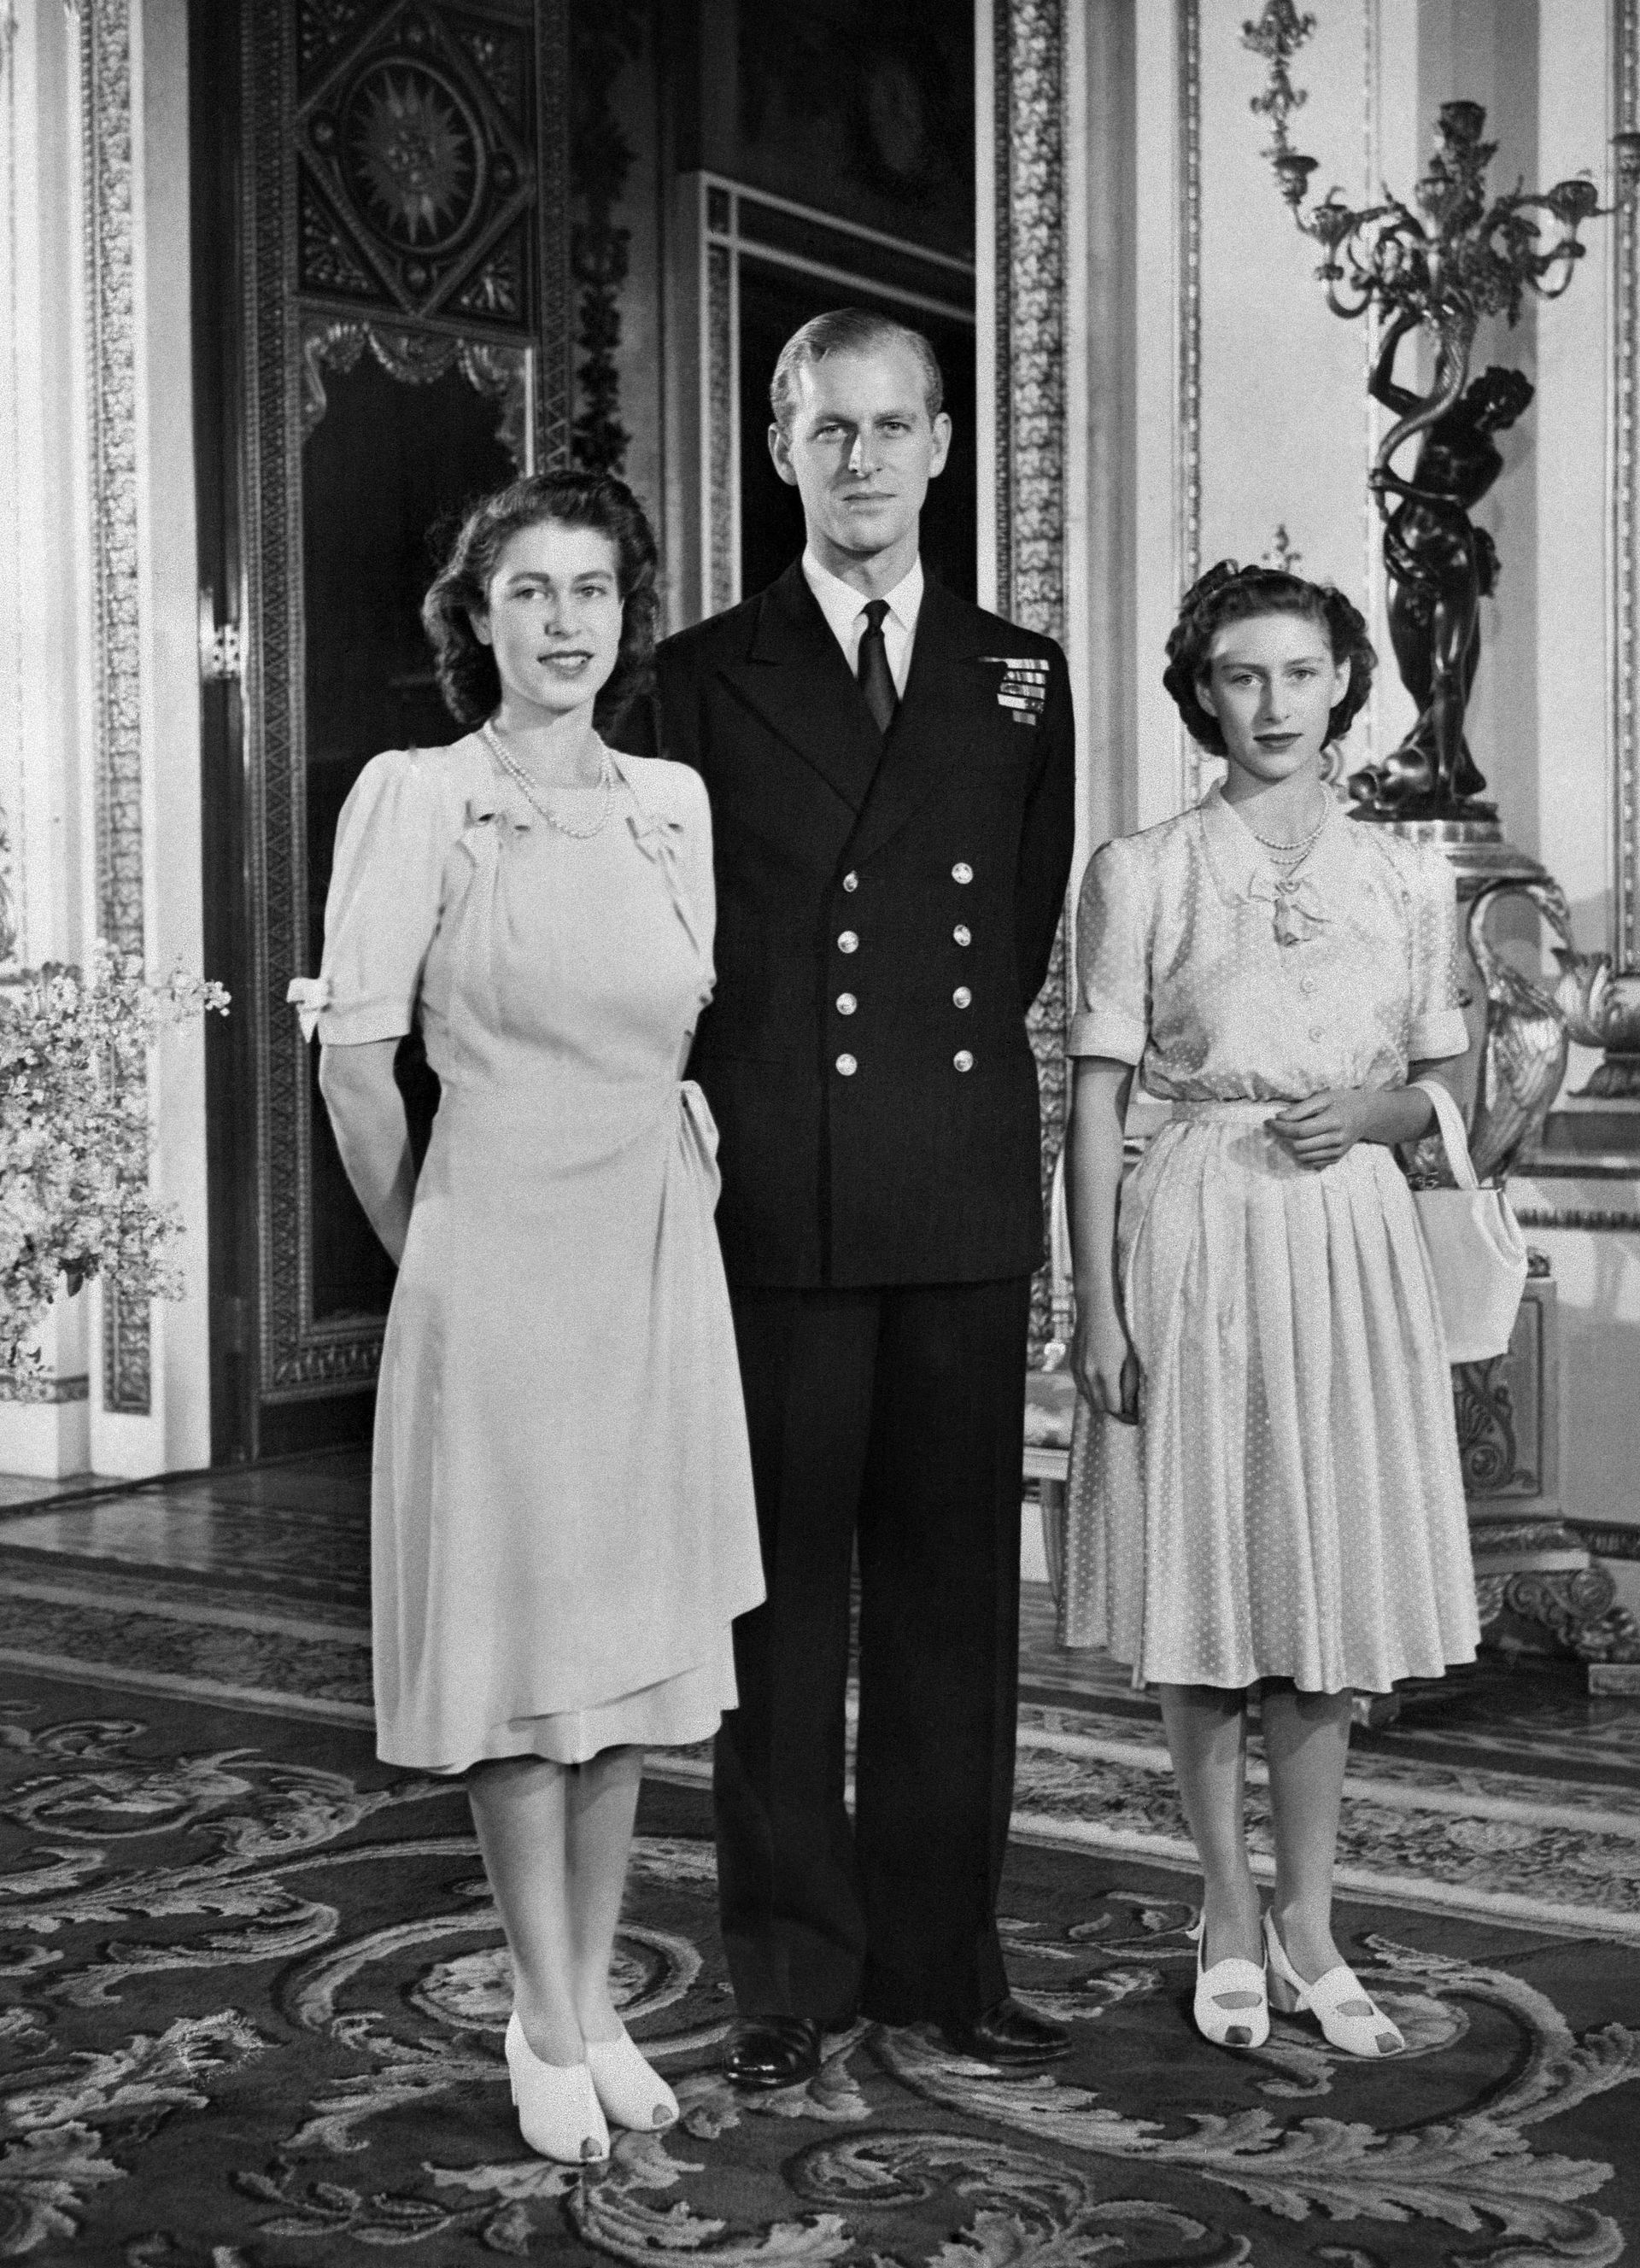 Princess Elizabeth (future Queen Elizabeth II), Philip Mountbatten (also the Duke of Edinburgh) and Princess Margaret pose in the Buckingham Palace on July 09, 1947 in London, the day their engagement was officially announced.